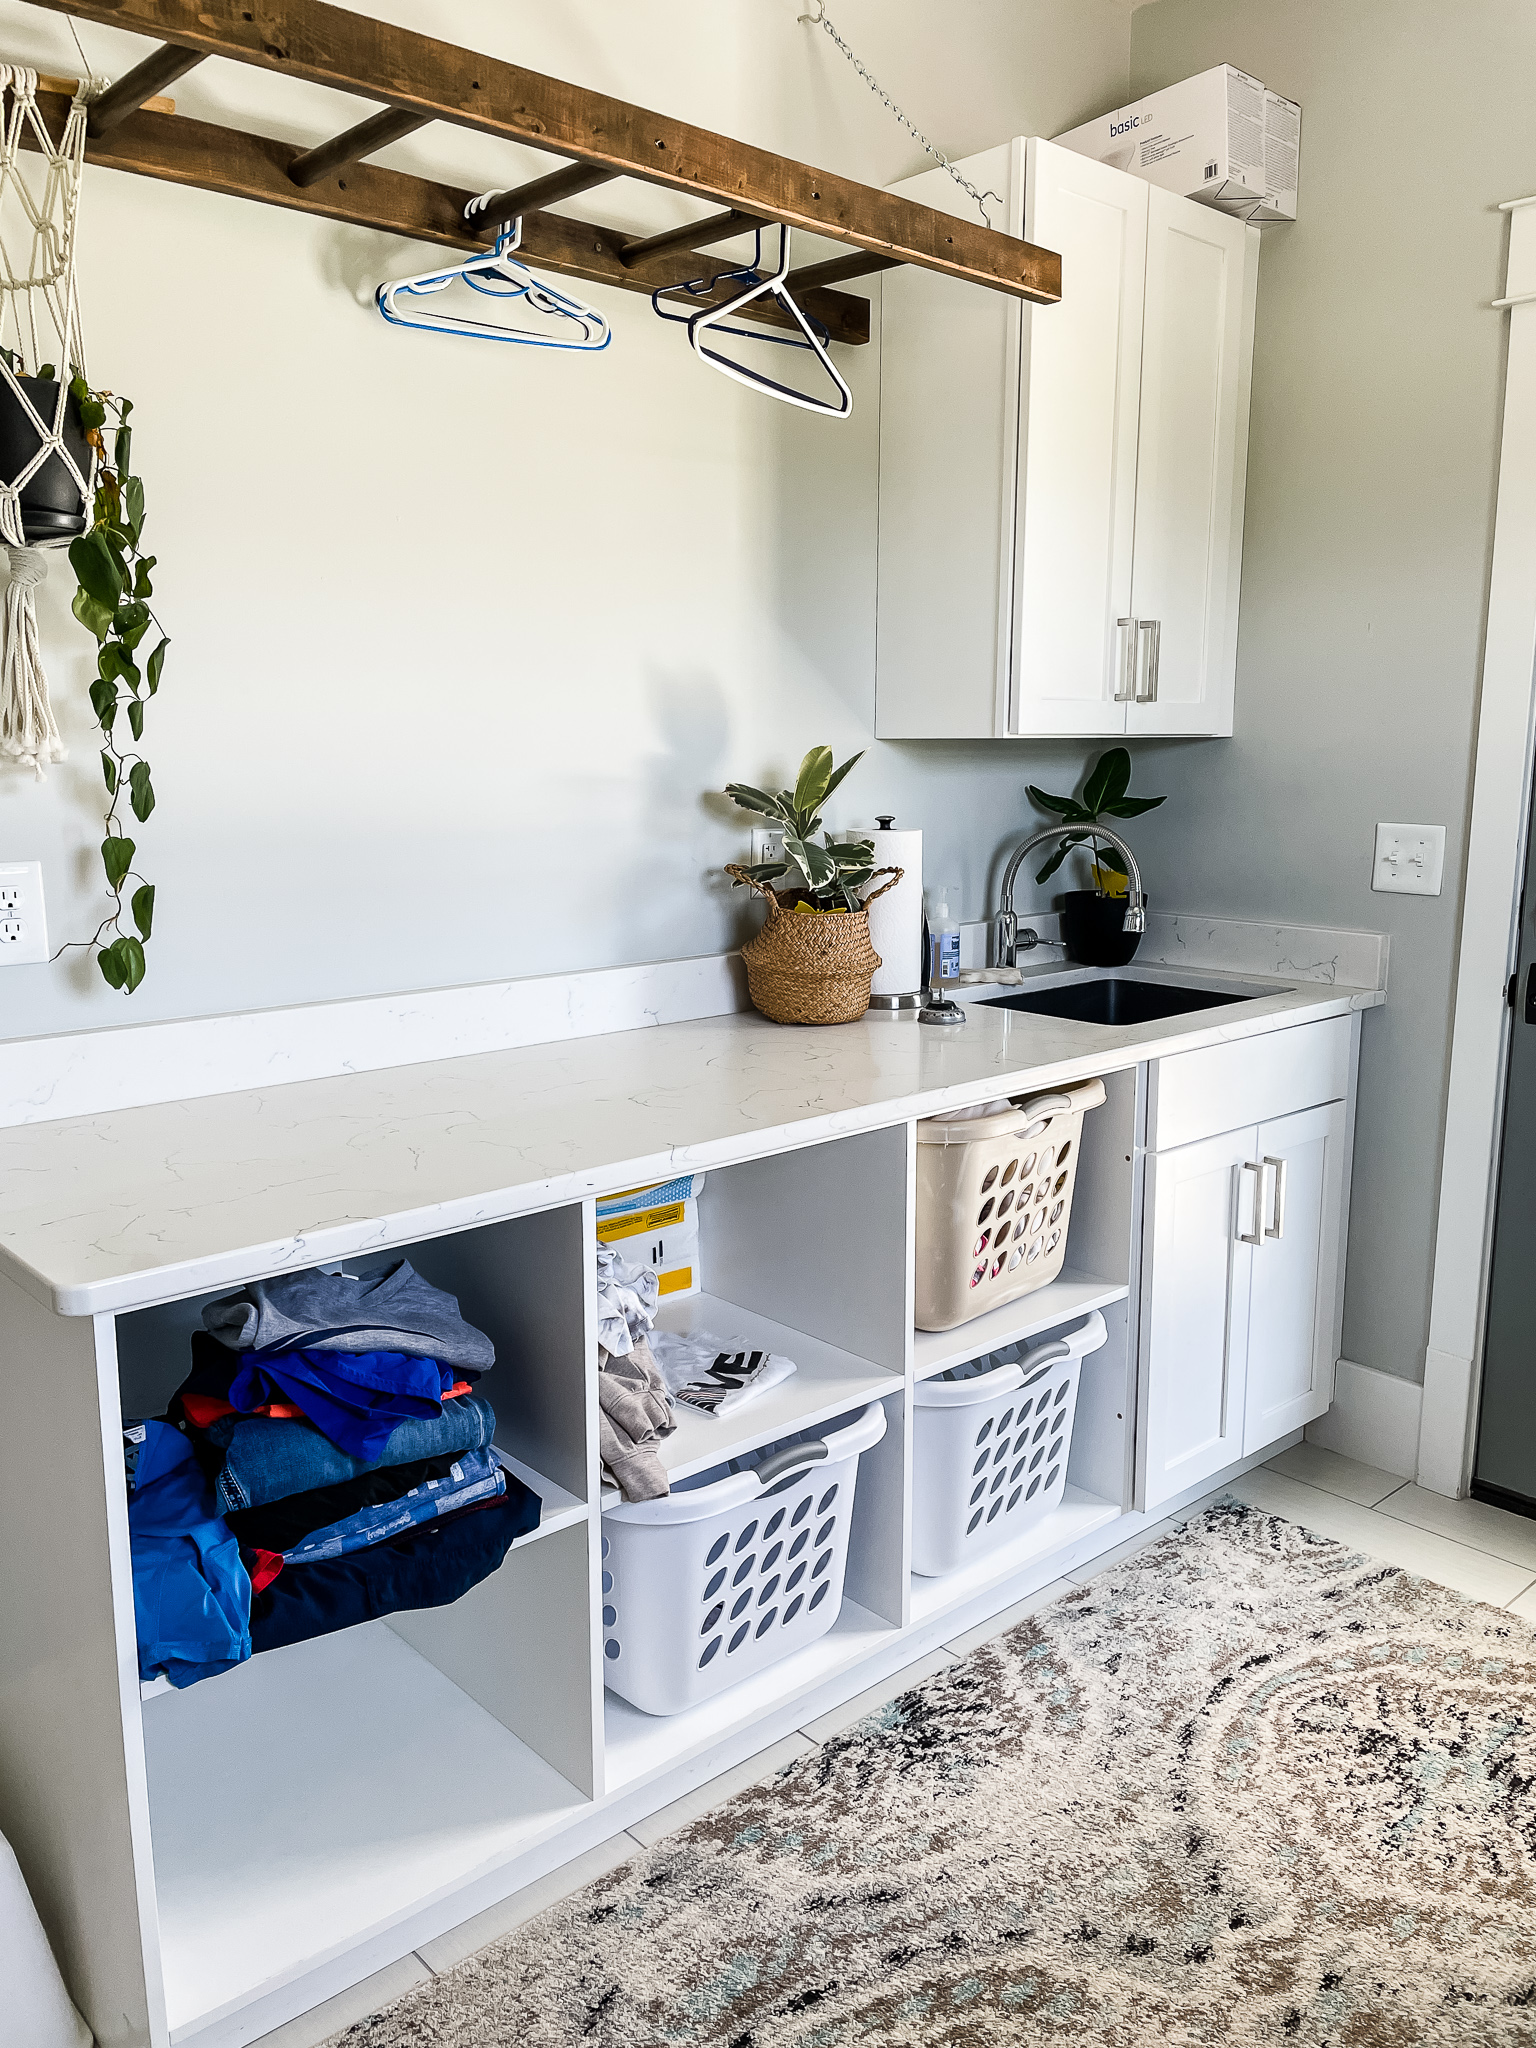 What You Need to Know Before Designing a Laundry Chute